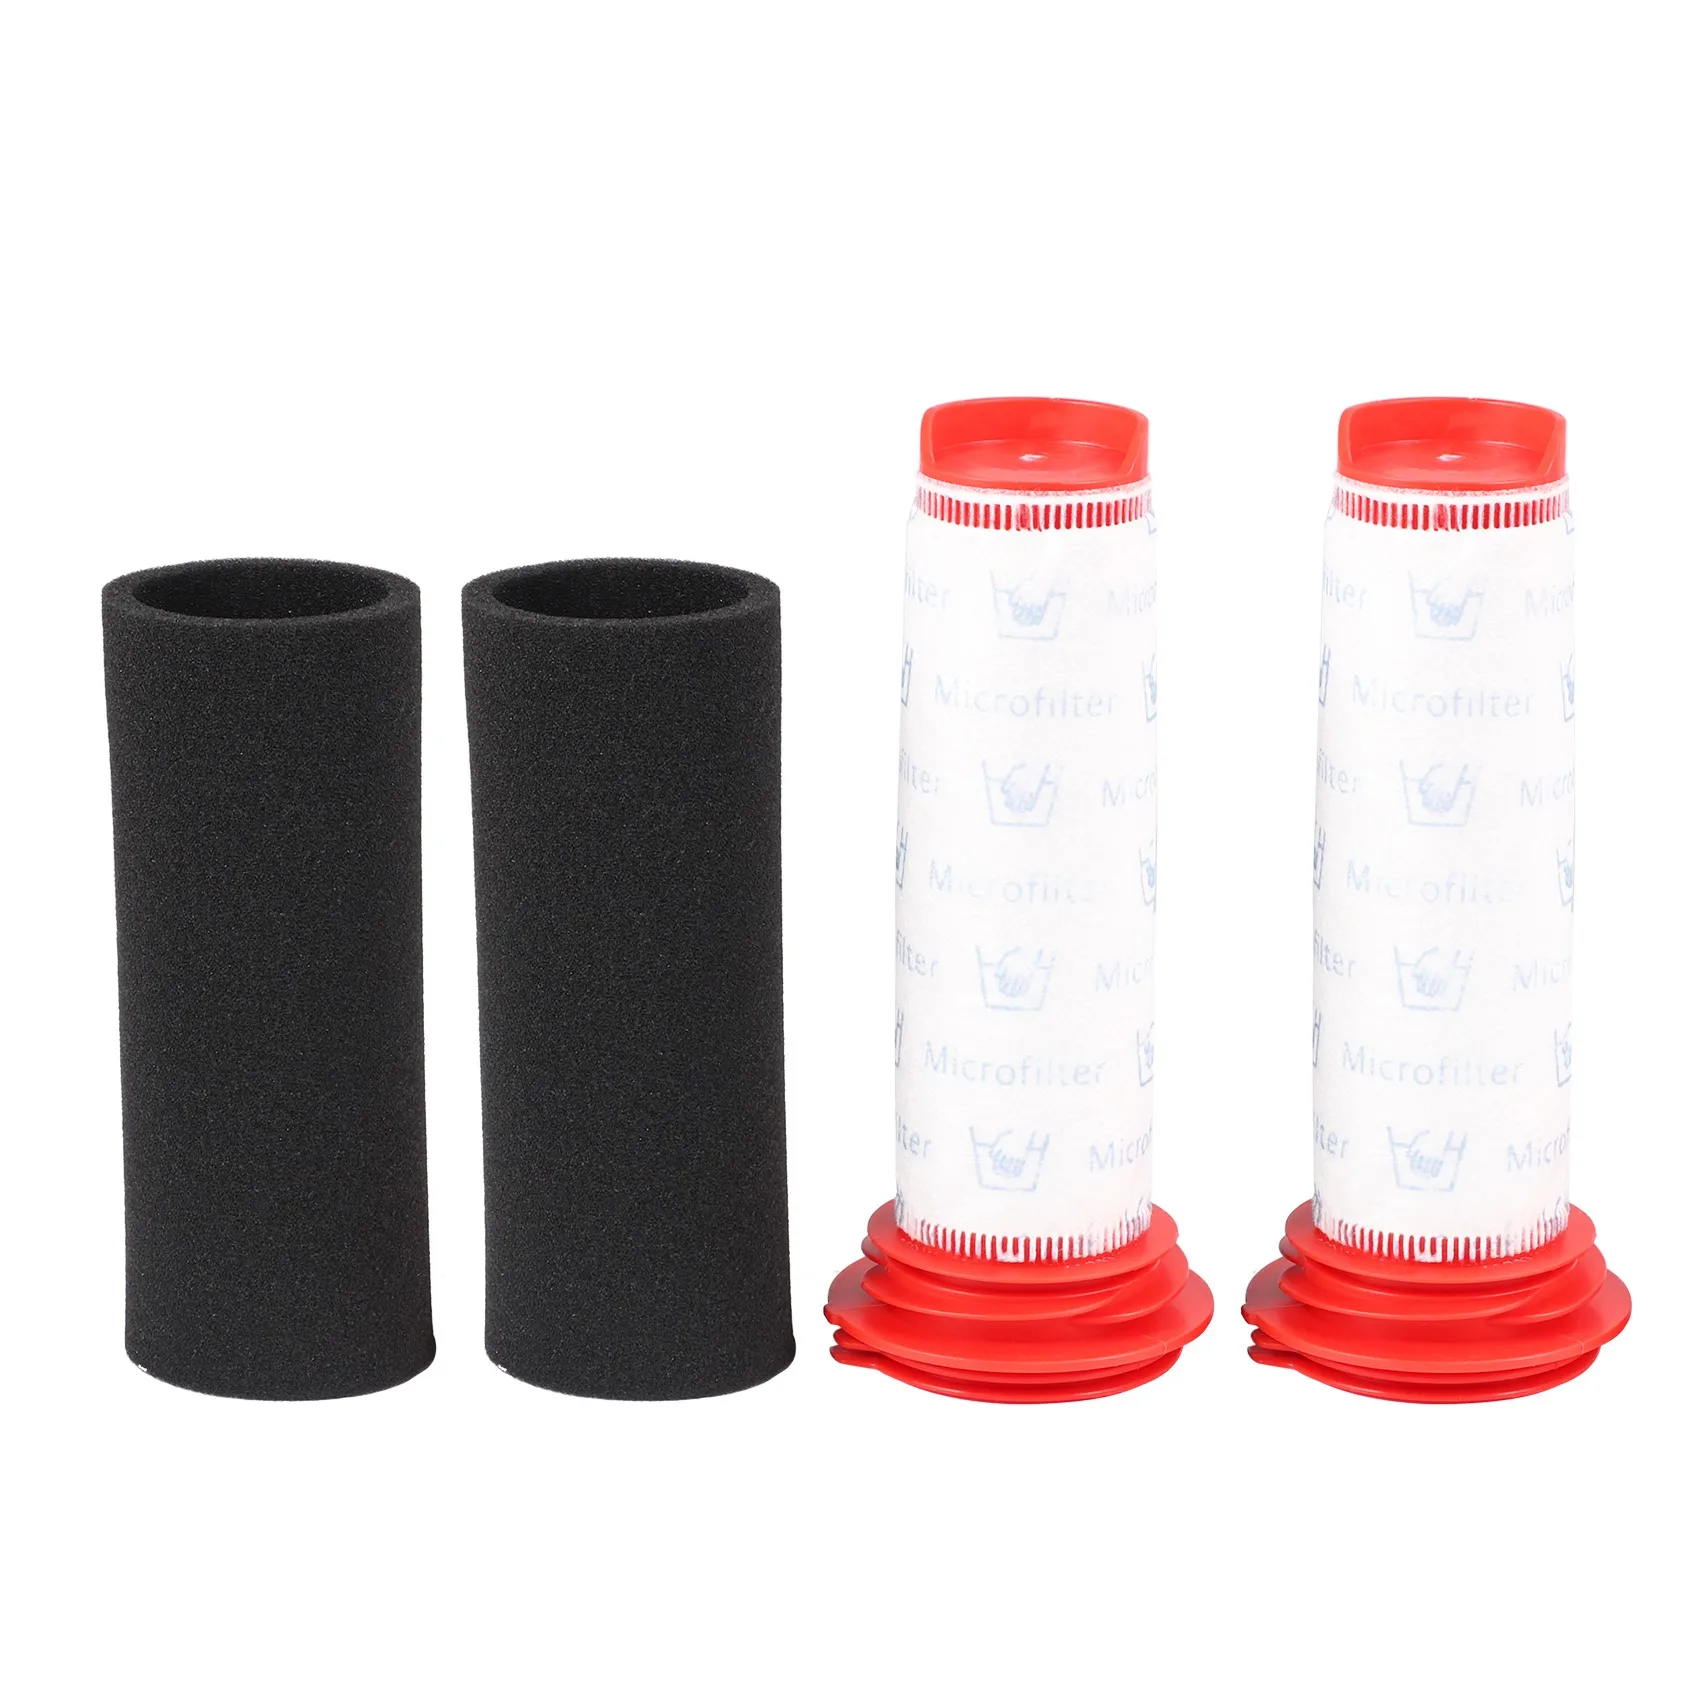 

Washable Main Stick Filter + Foam Insert for Bosch Athlet Cordless Vacuum Cleaner (2 of Each)